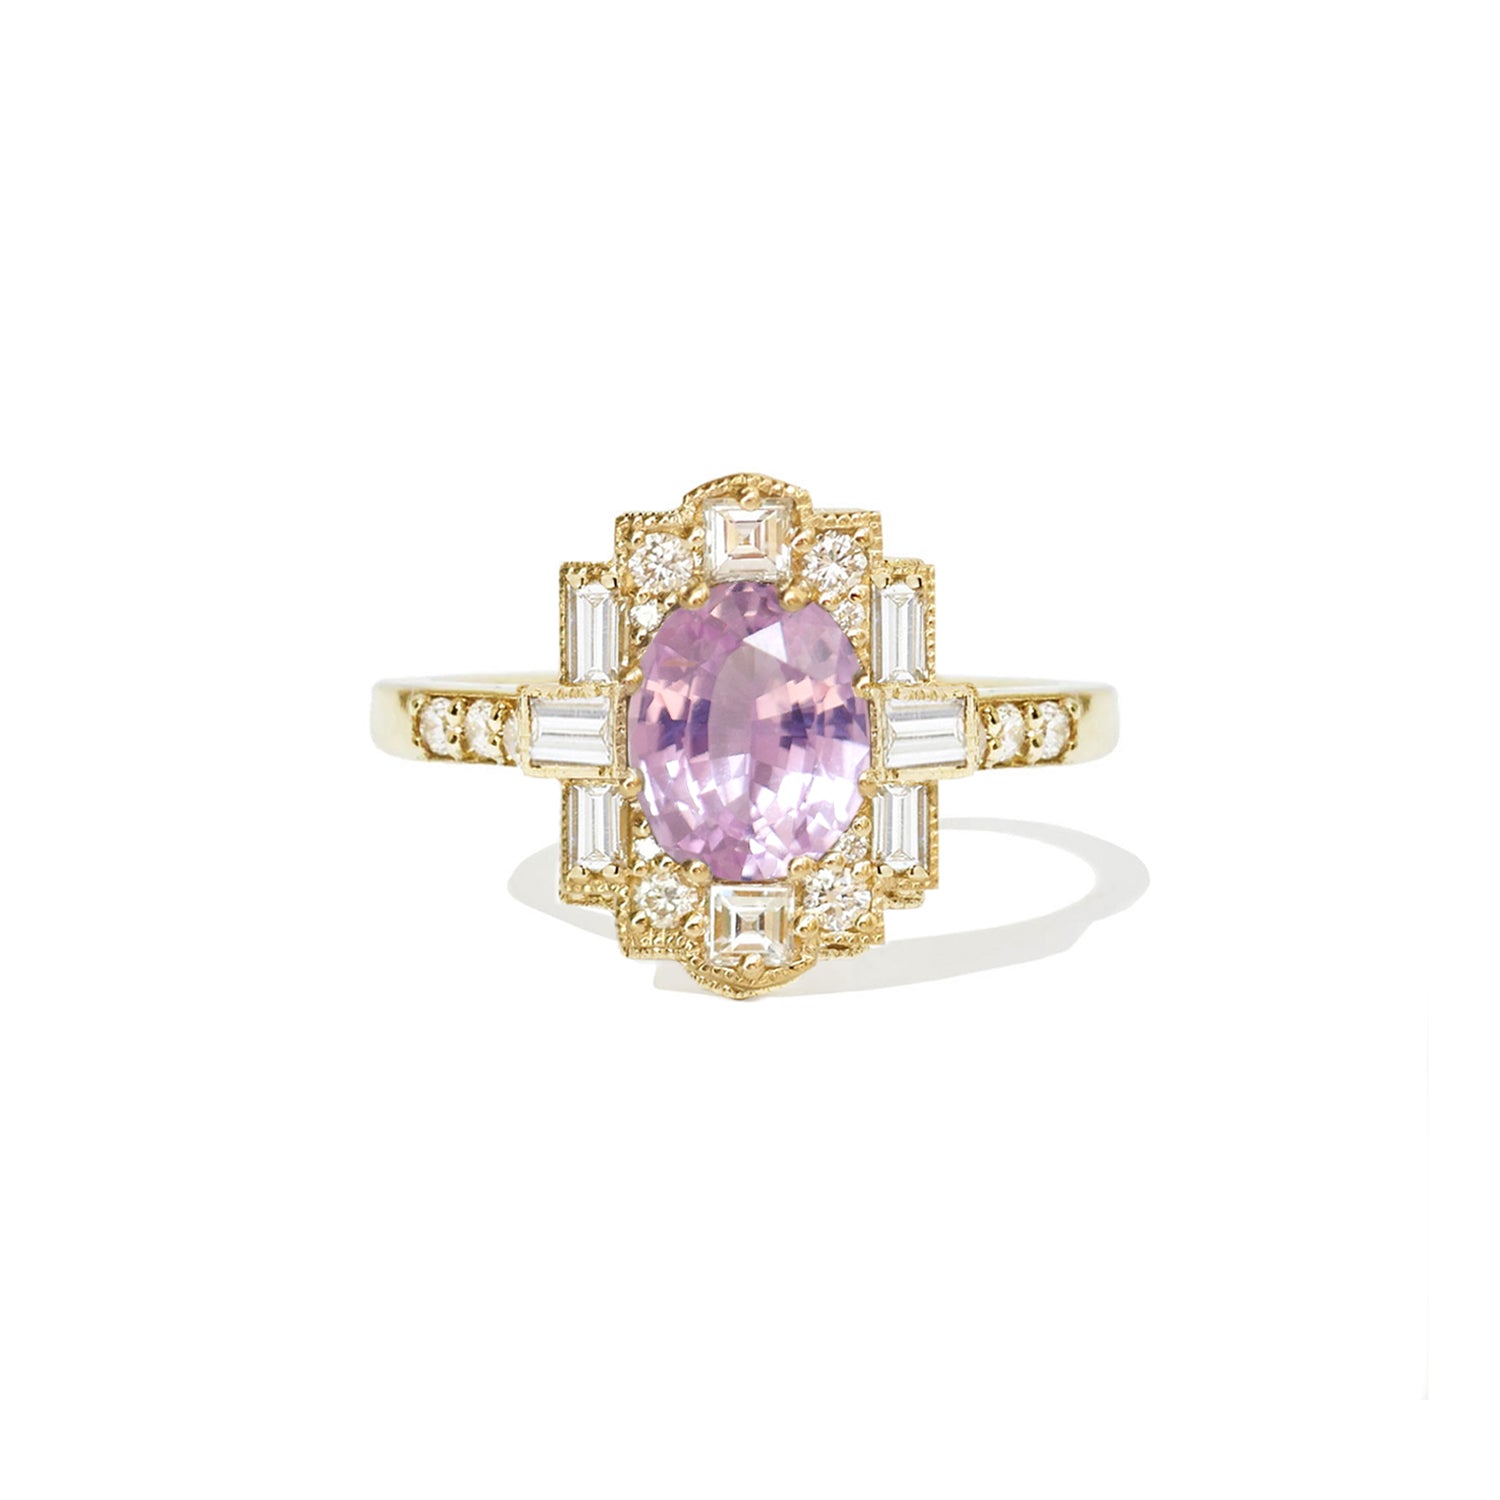 1.98 ctw Oval Pink Sapphire